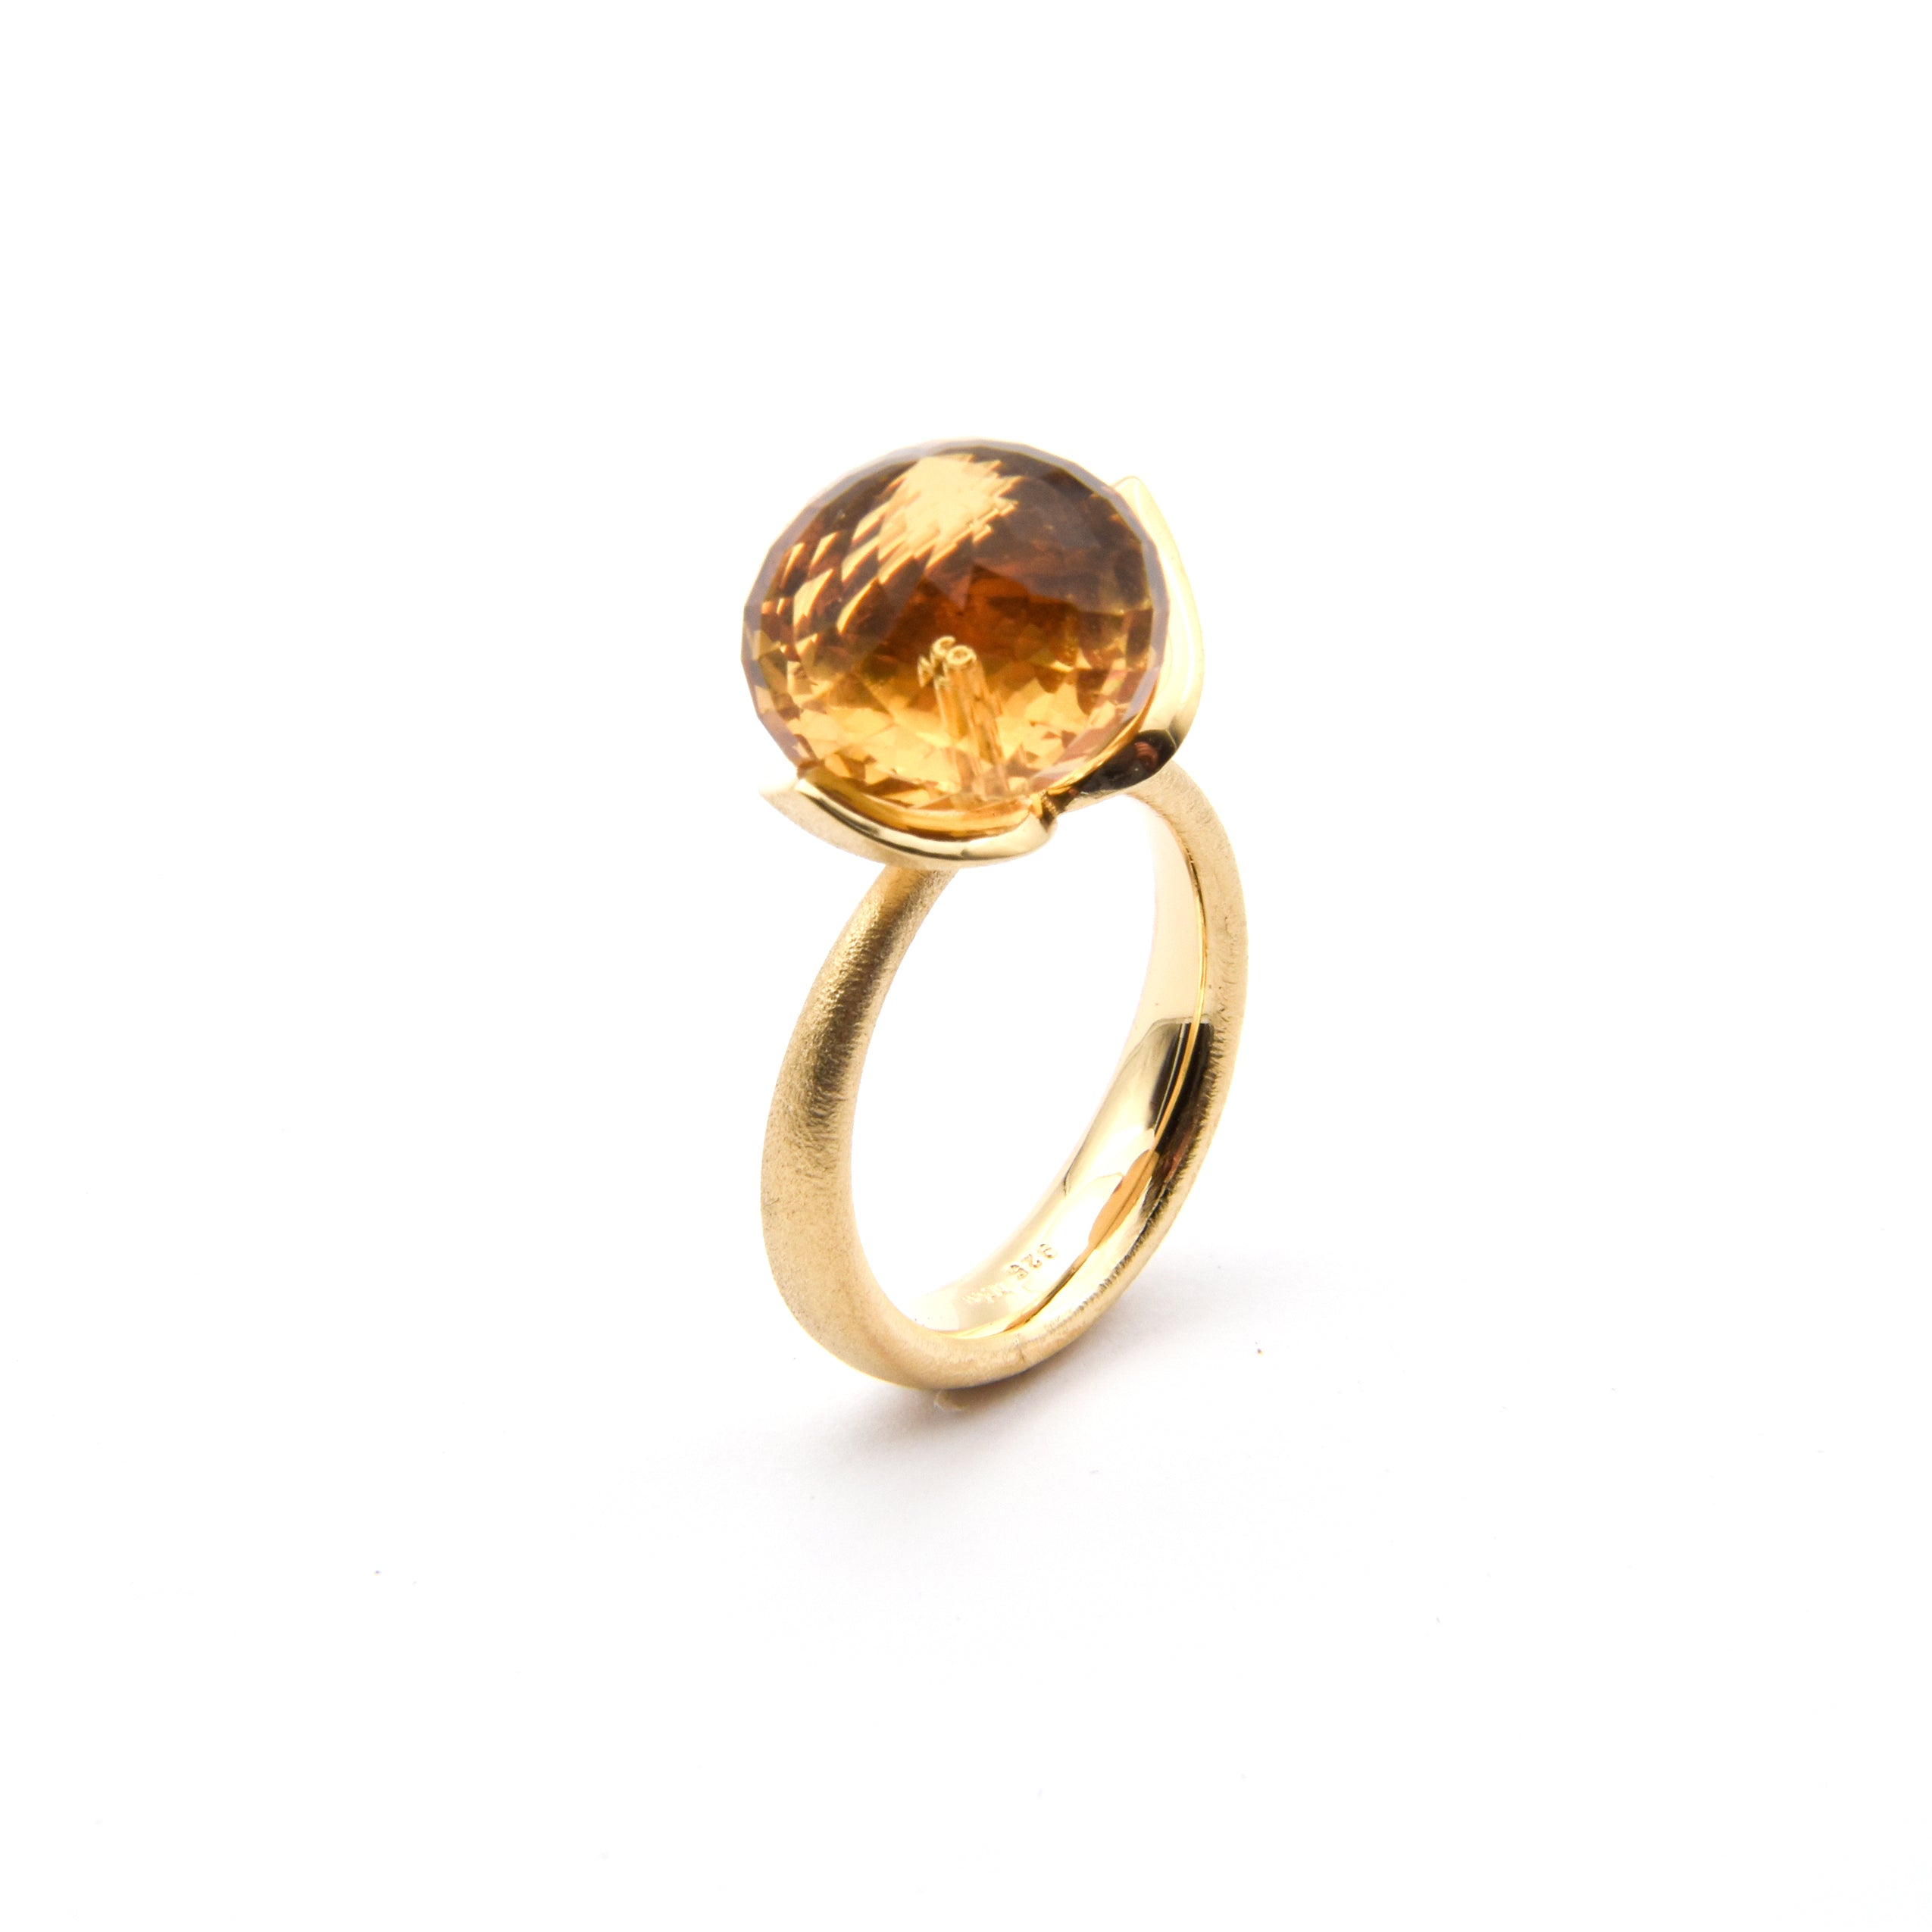 Dolce ring "big" with champagne quartz 925/-